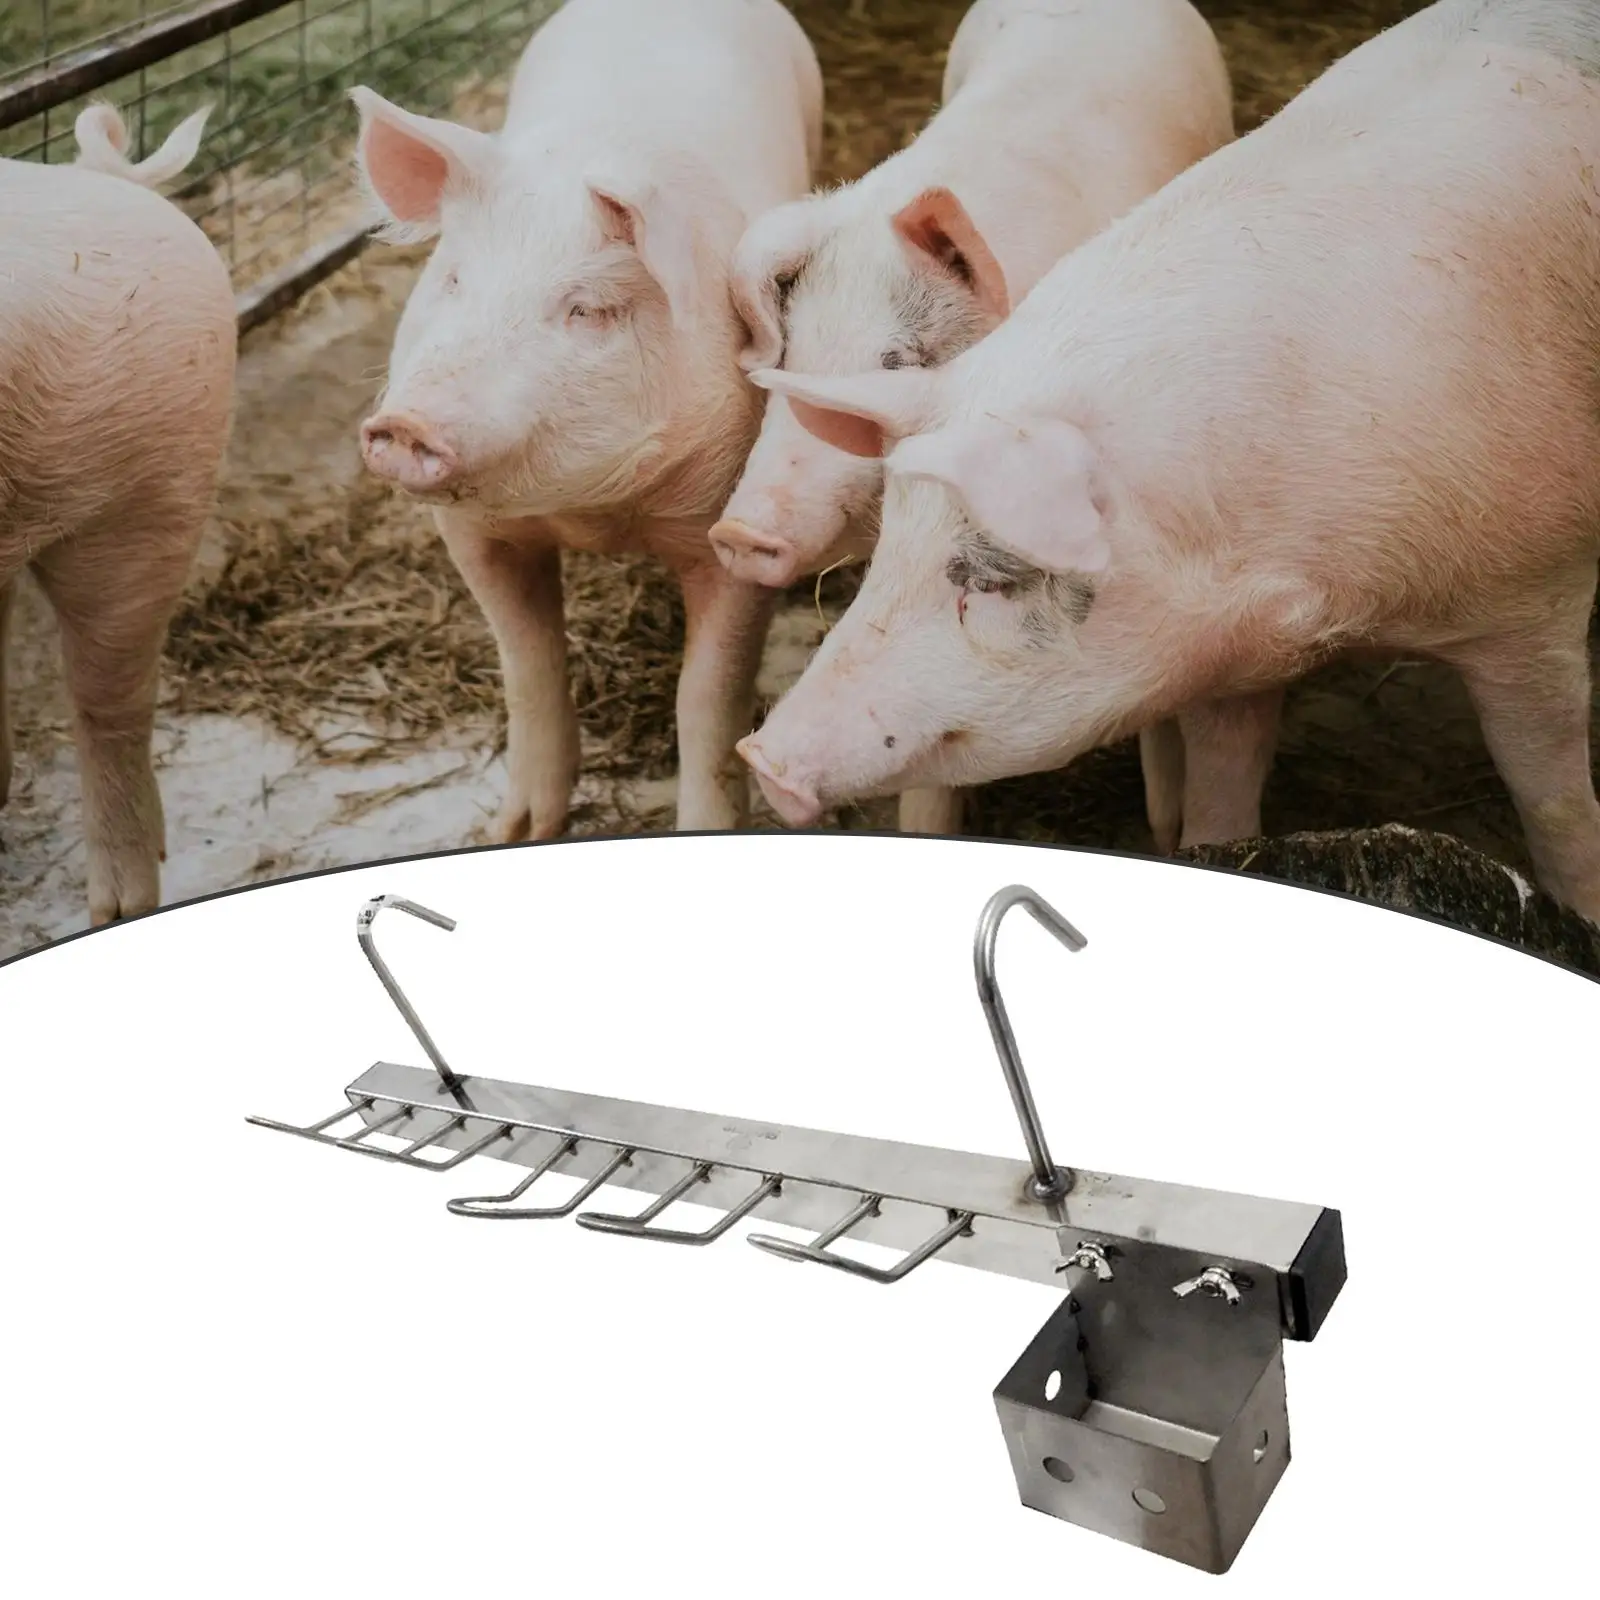 Stainless Steel Piglet Rack Sturdy Farms Portable Zoos Lightweight Heavy Duty Easy to Use Fixing Frame Pig Frame Hanging Rack